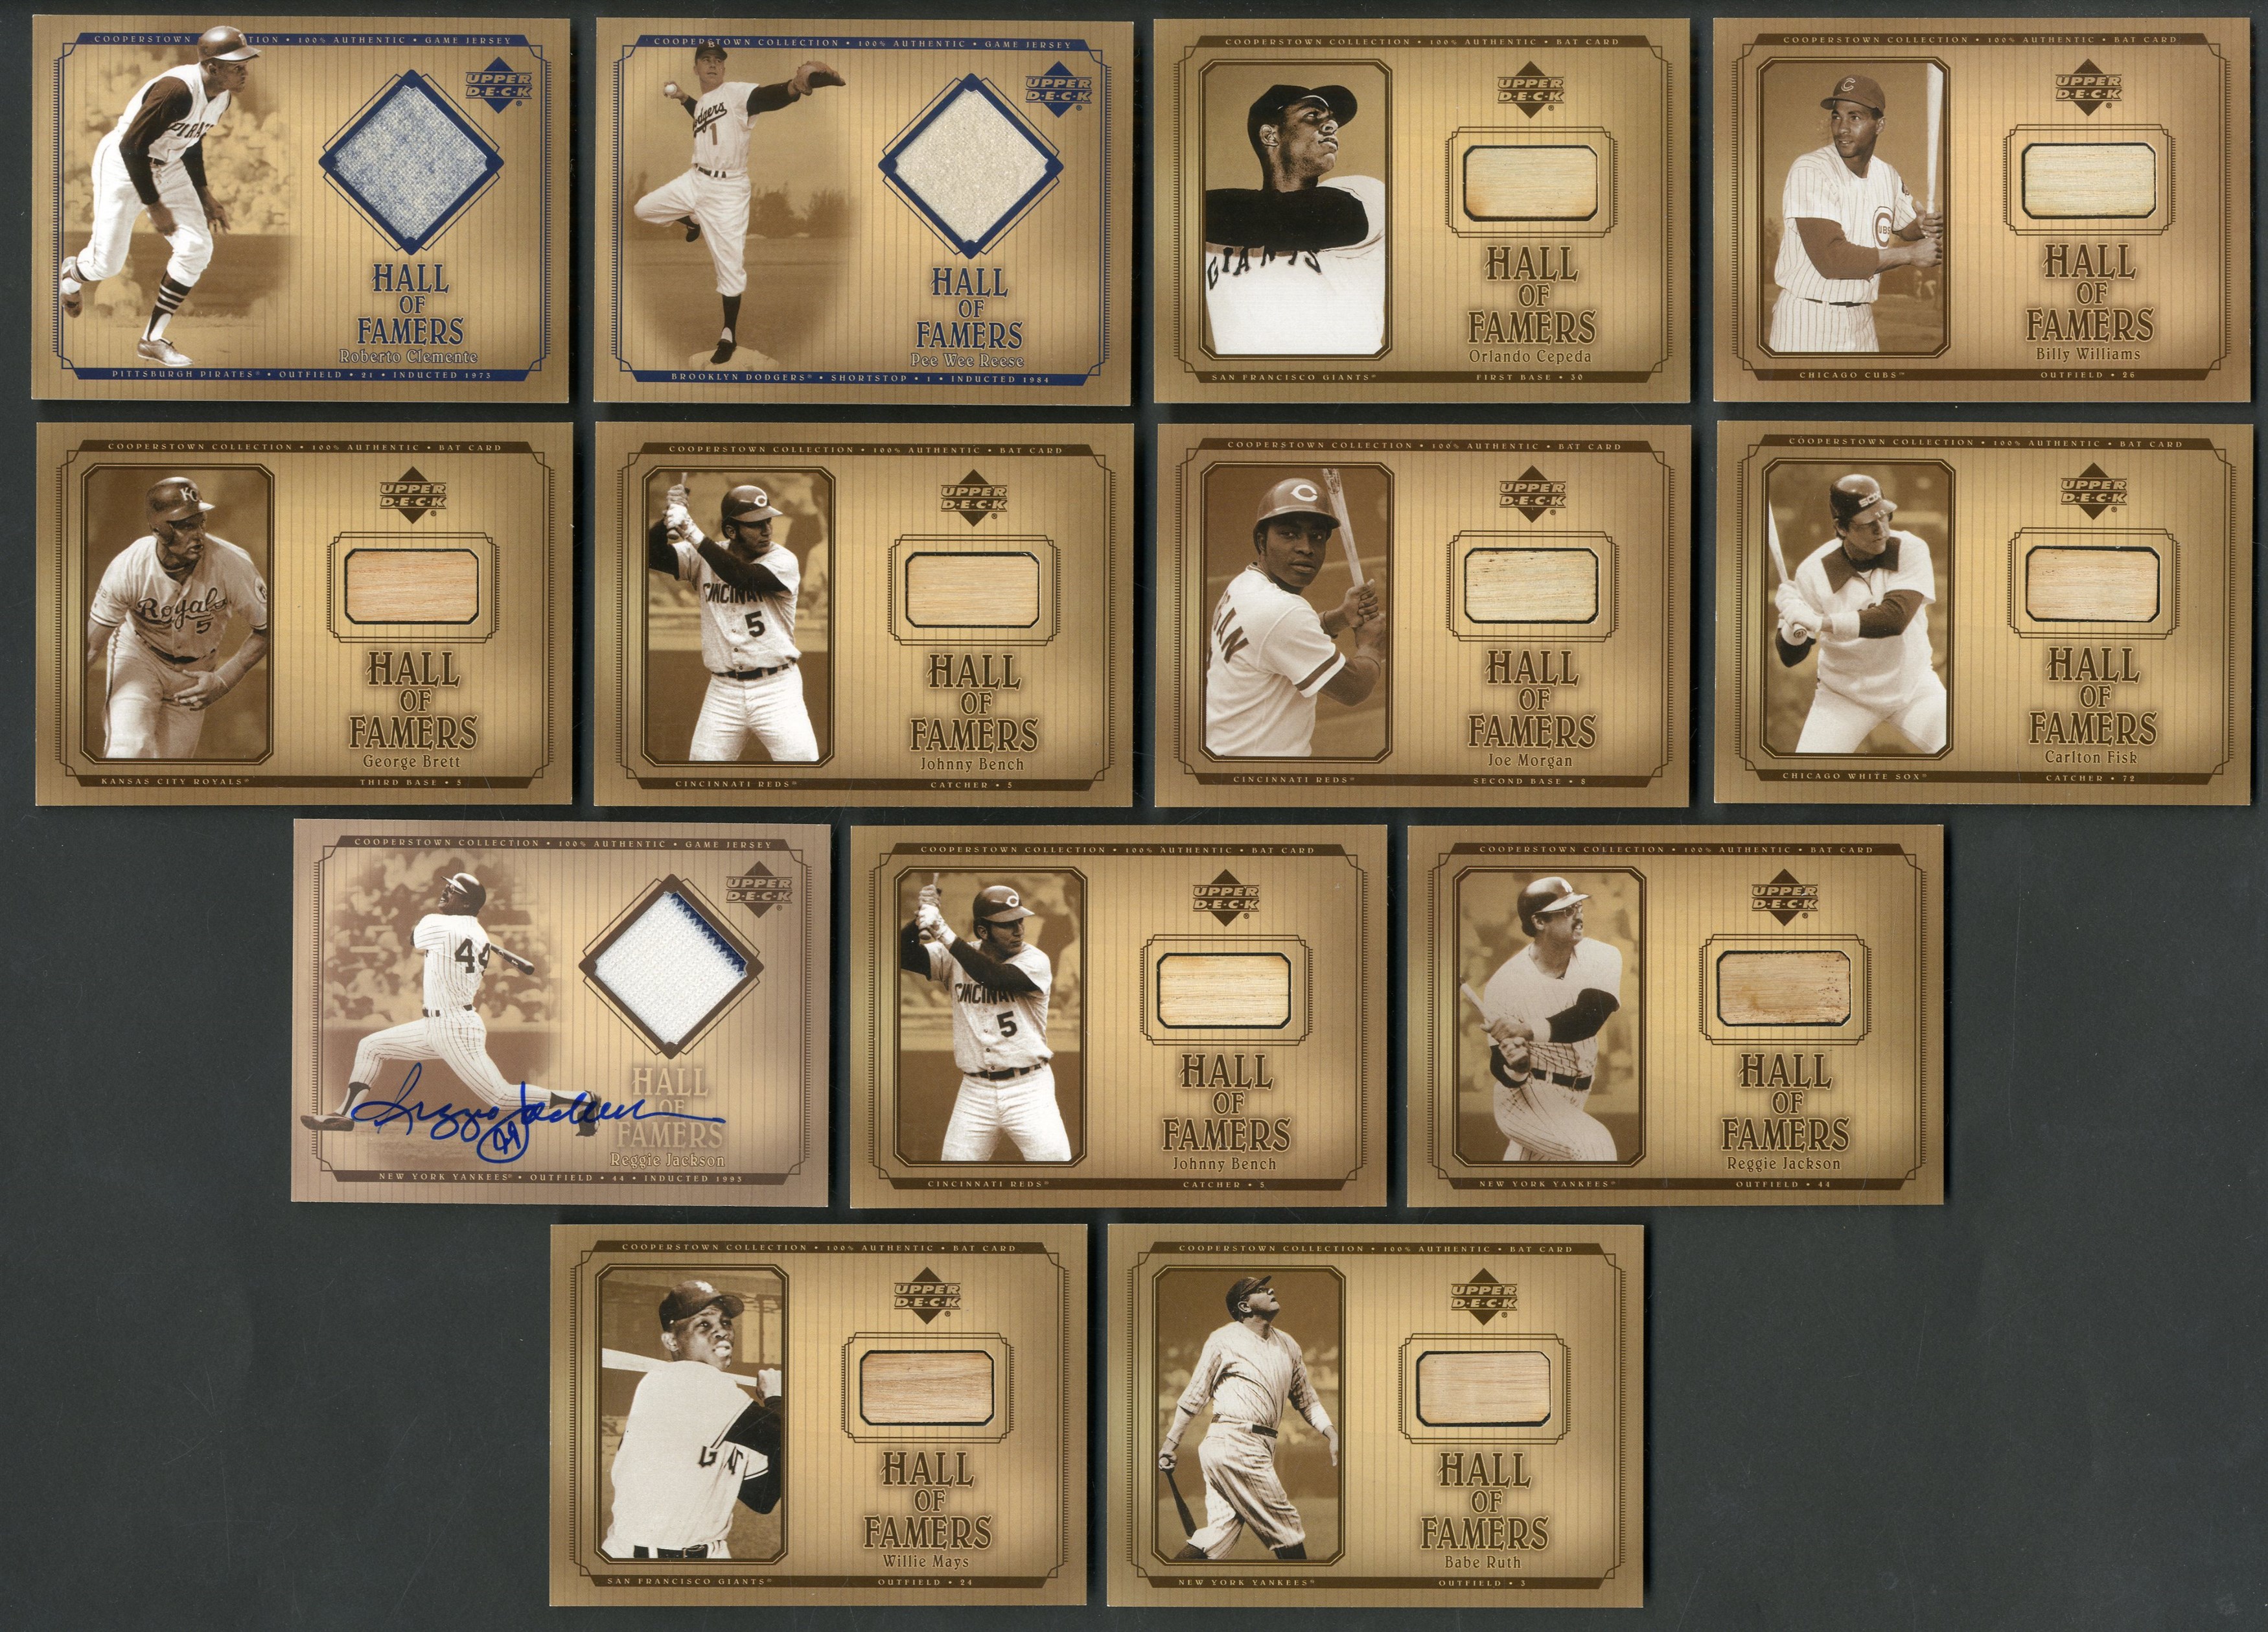 - 2001 Upper Deck Hall of Famers Game Used & Autograph Collection - Ruth, Clemente, Mays (13)